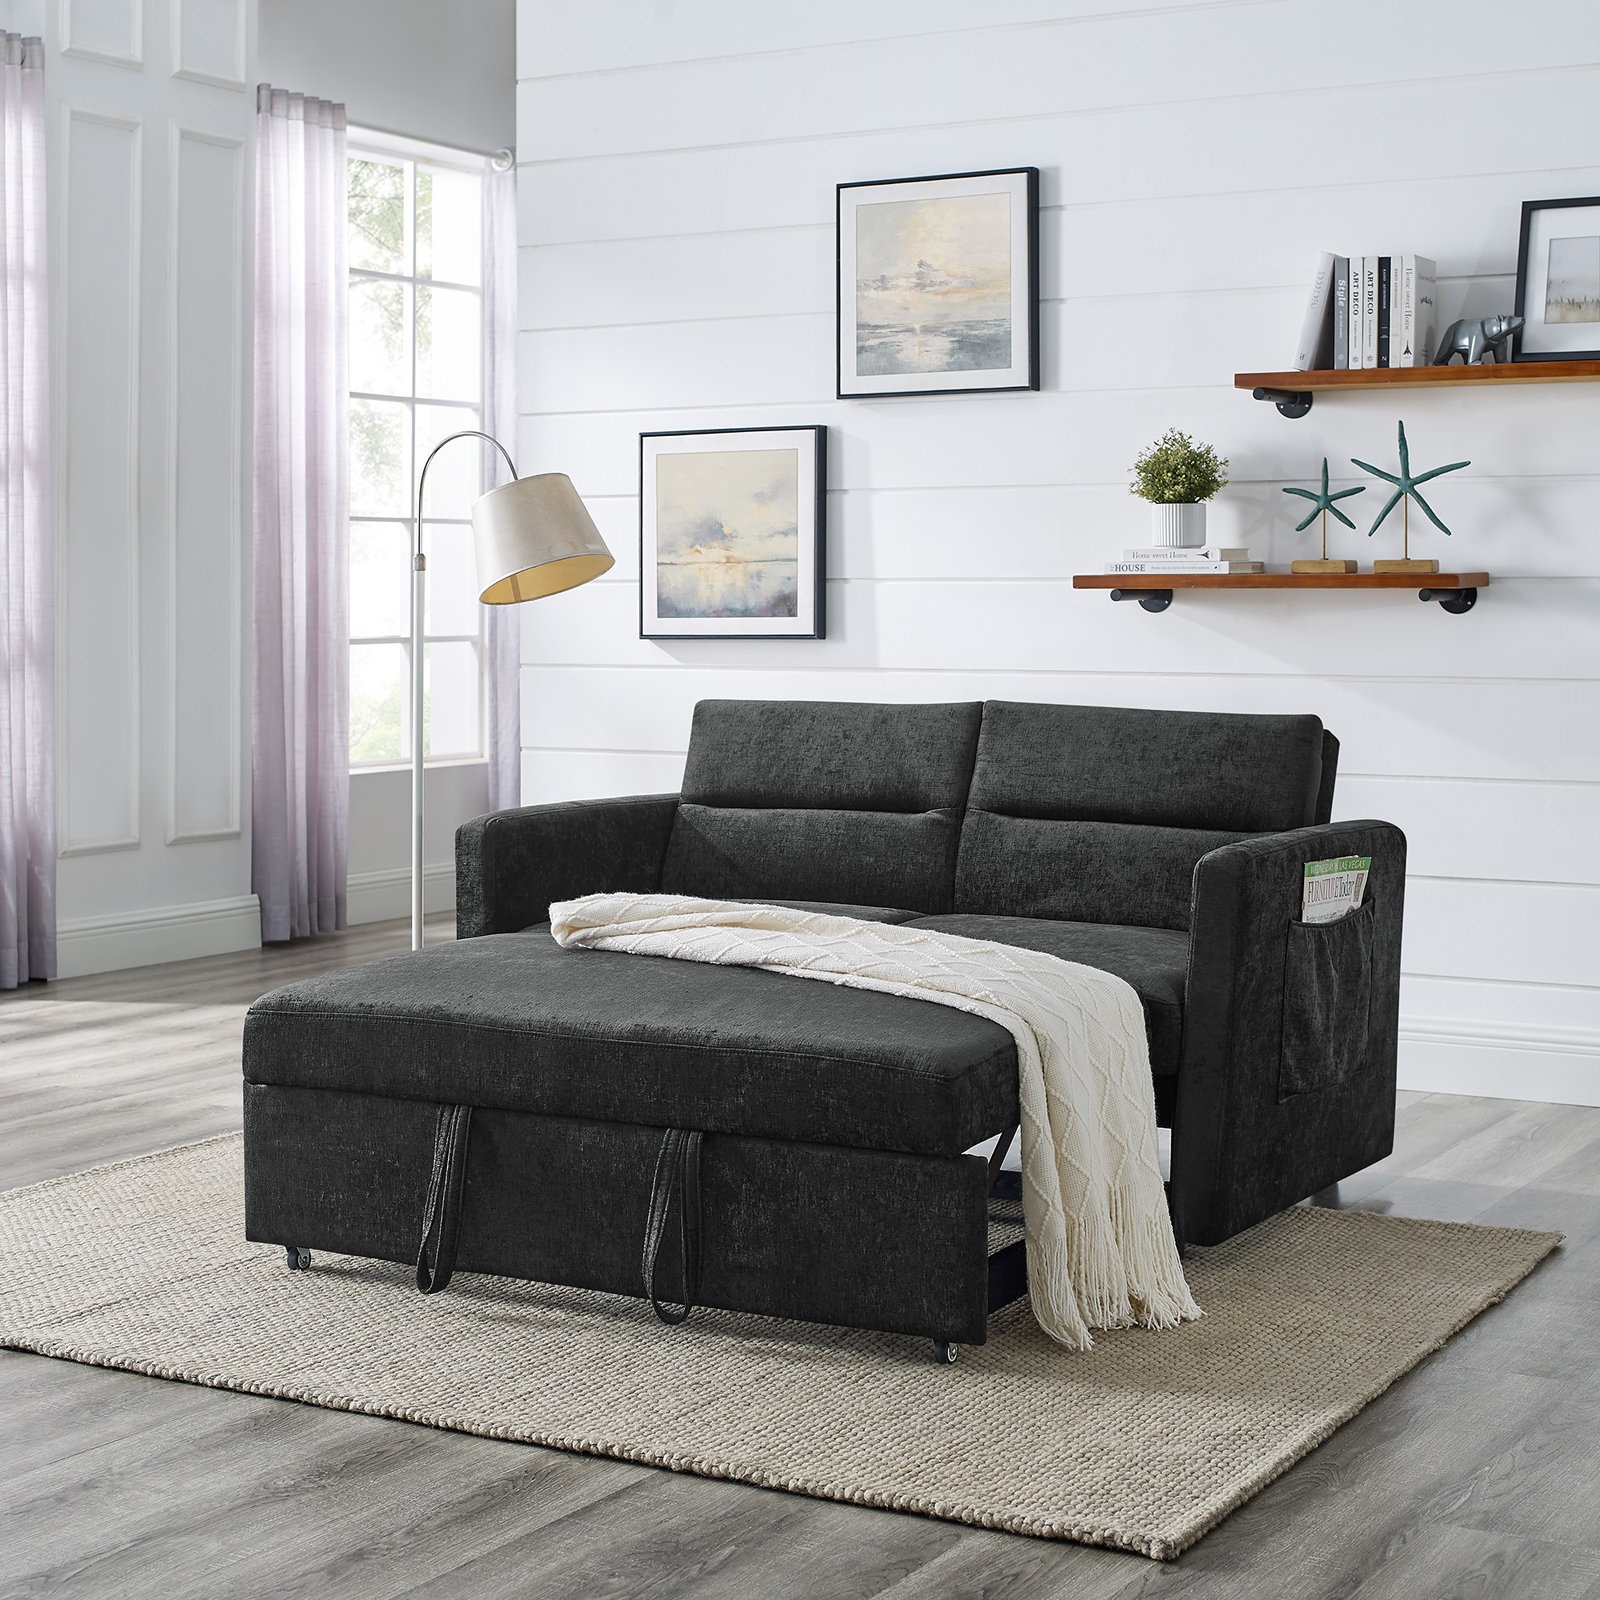 Barato Sleeper With Storage - Sofa Bed / Light Brown